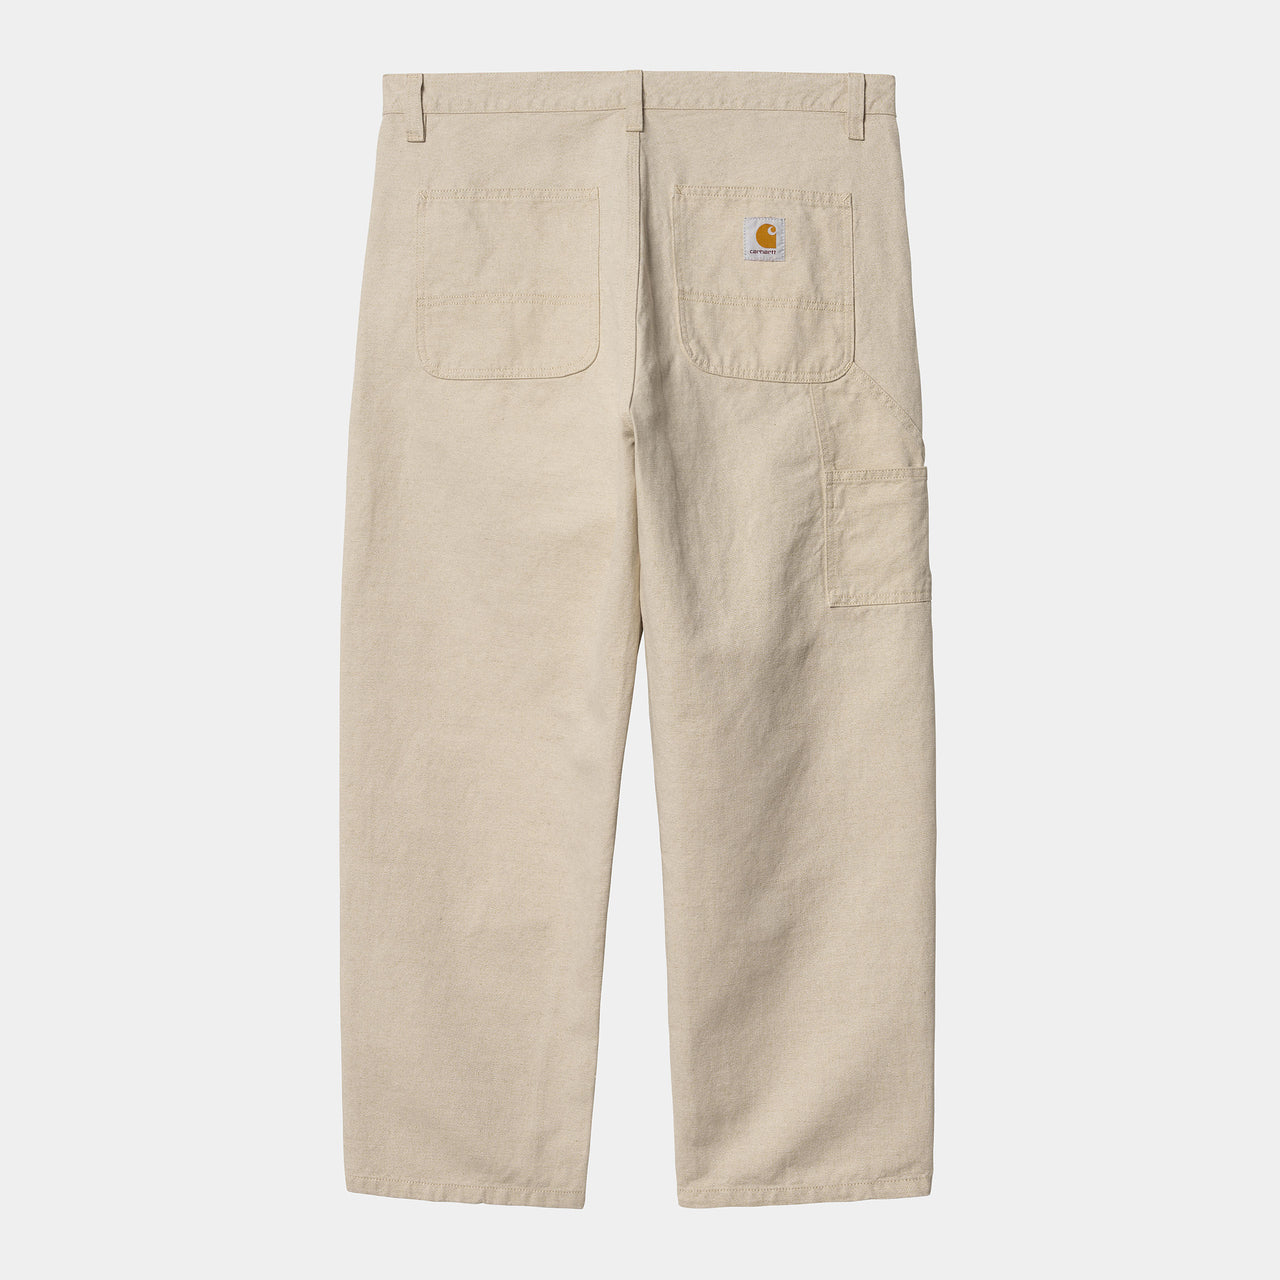 WALTER DOUBLE KNEE PANT BY CARHARTT WIP